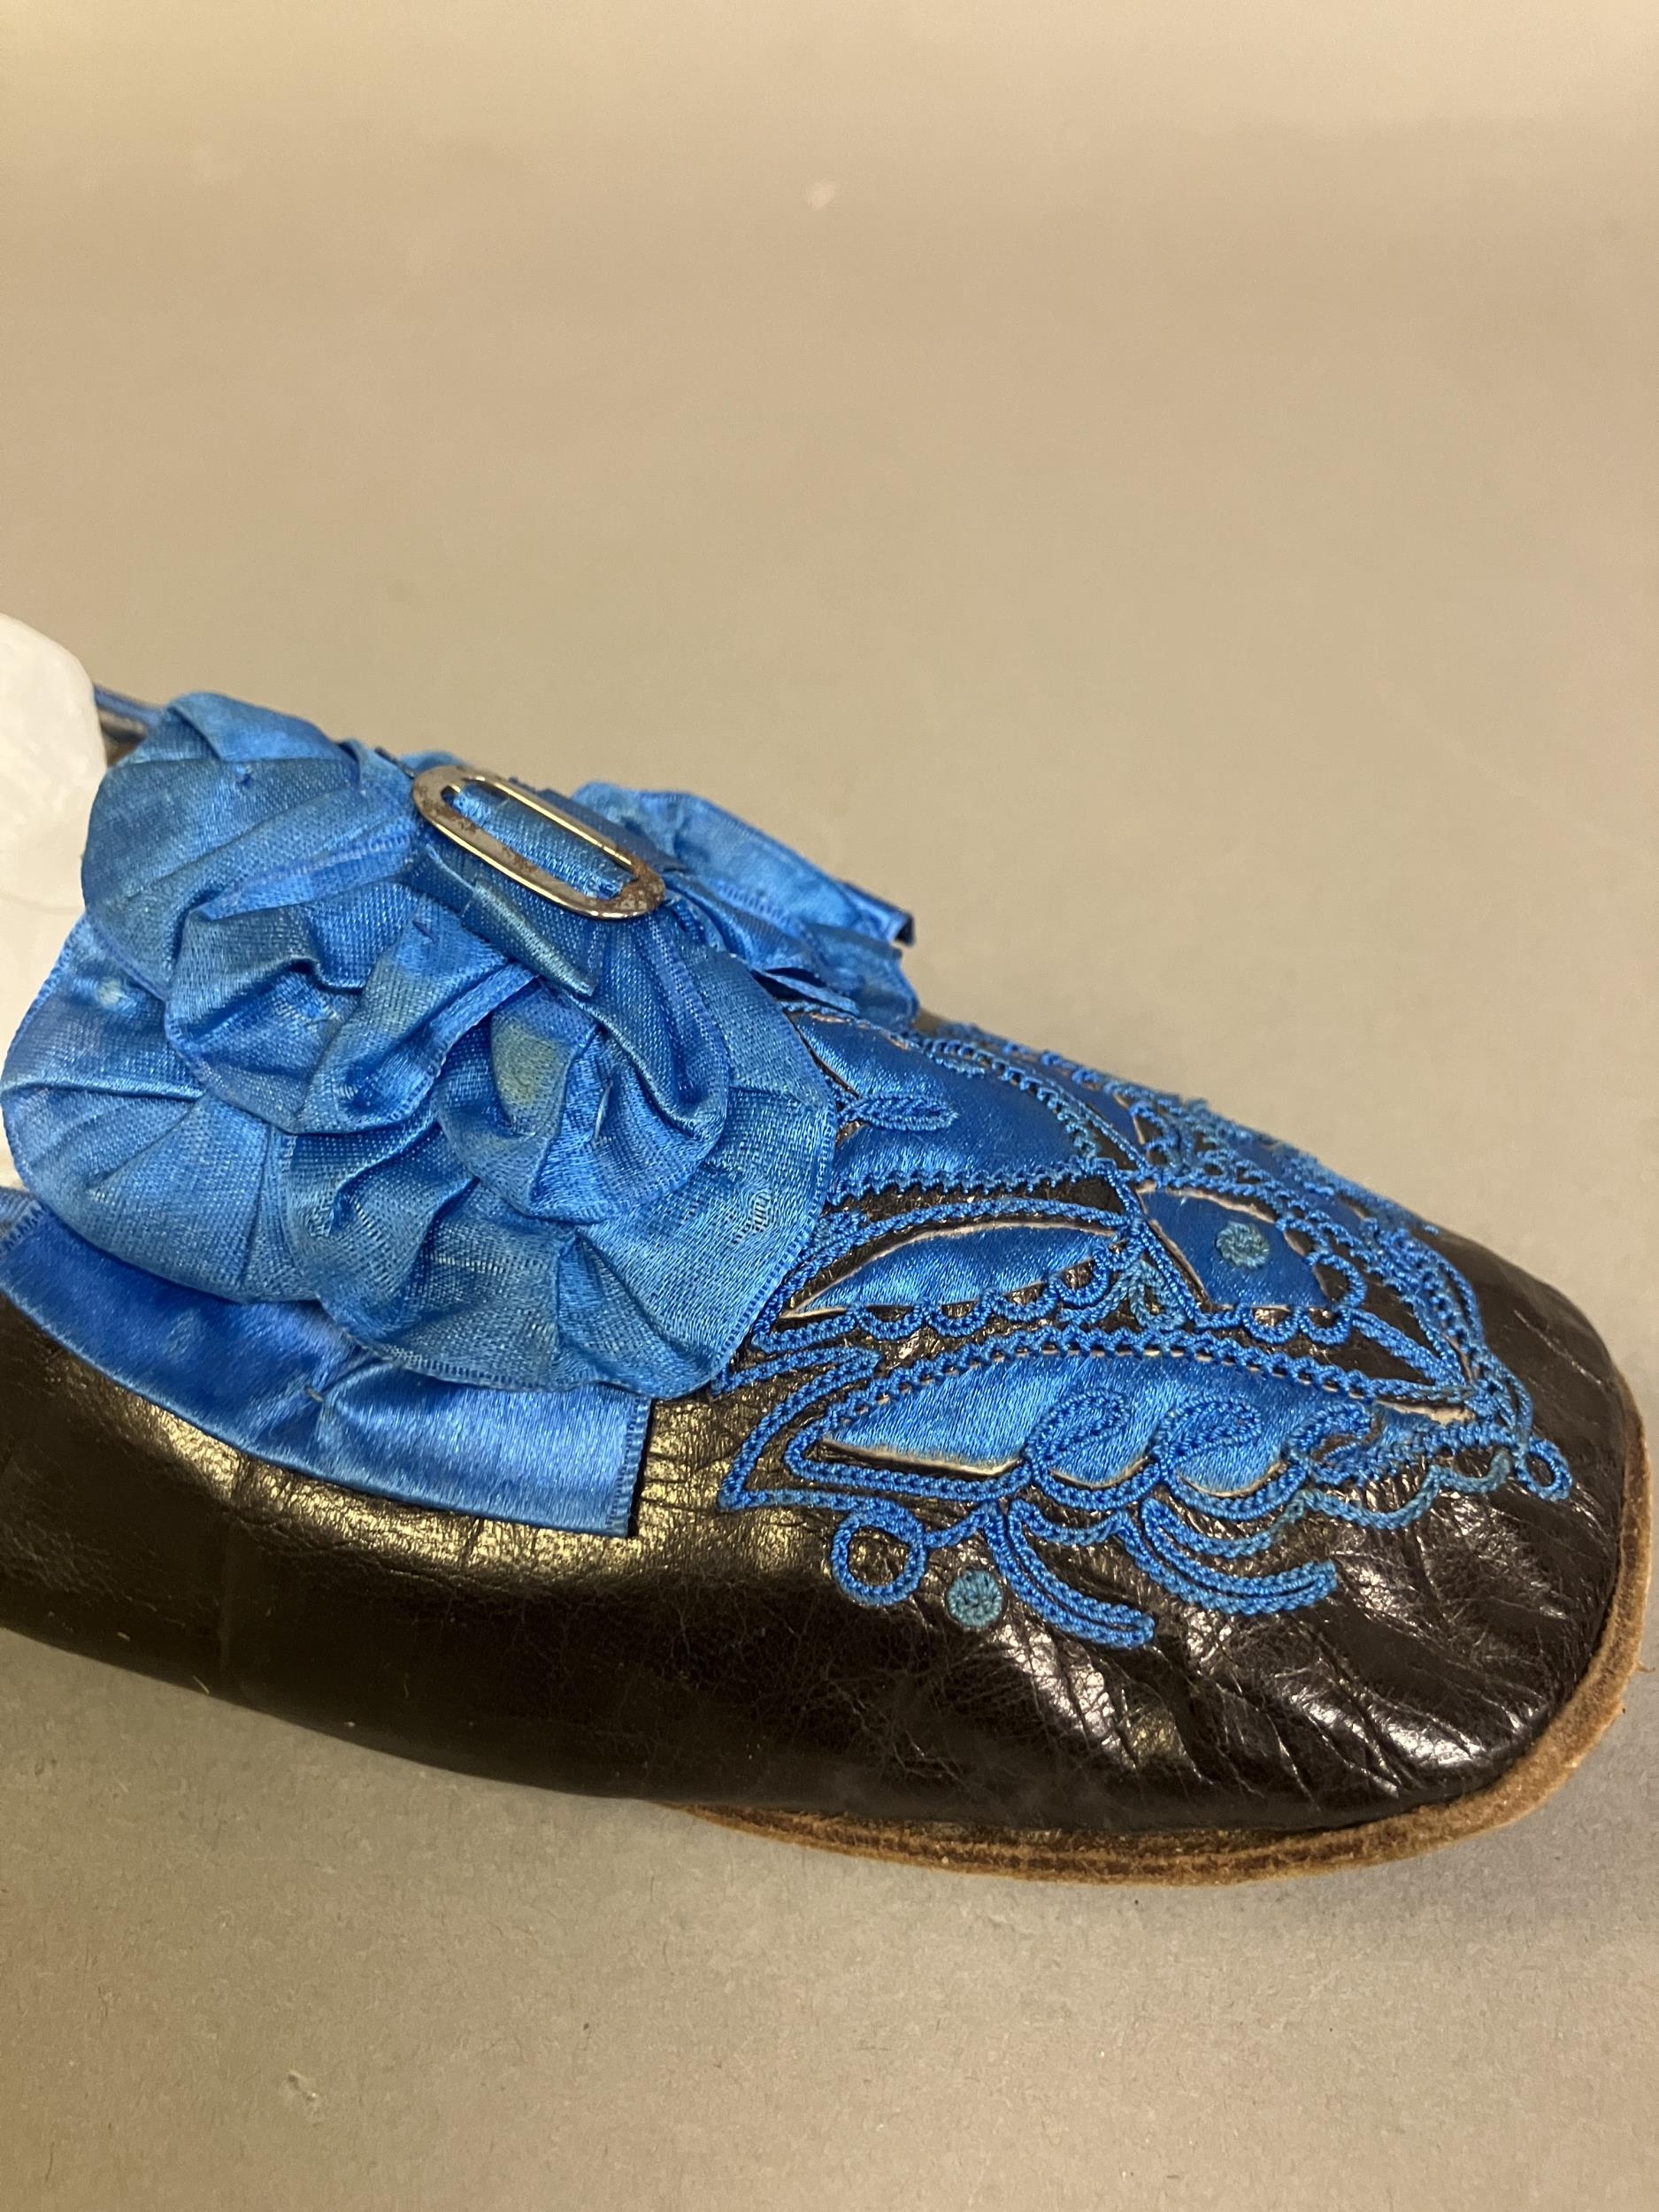 A fine pair of French mid-19th century slippers, black glacé kid, edged with blue braid, square - Image 5 of 6